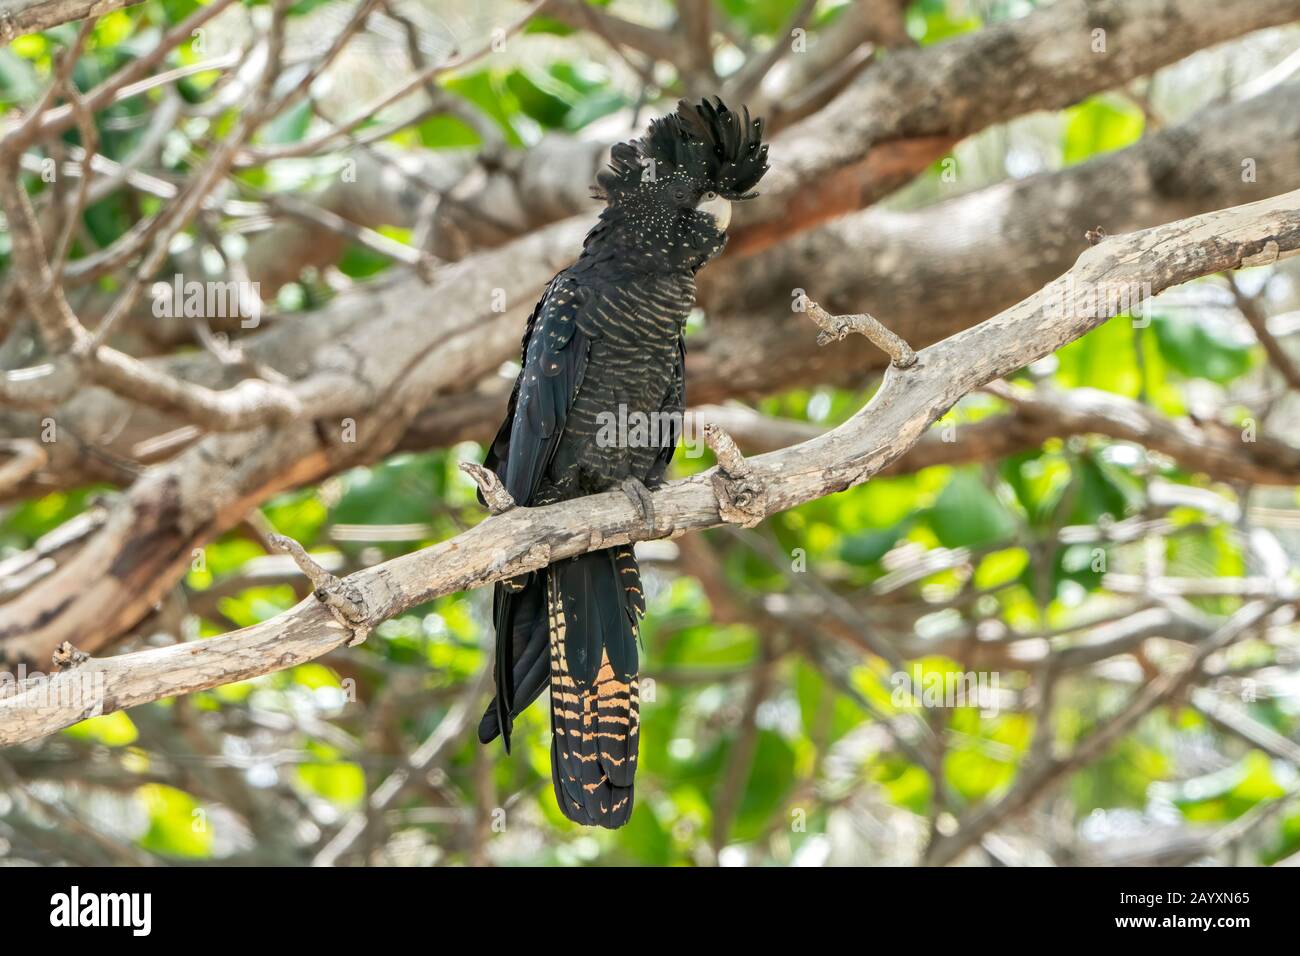 red-tailed black cockatoo, Calyptorhynchus banksii, bird perched in tree, Cairns, Queensland, Australia 7 January 2020 Stock Photo